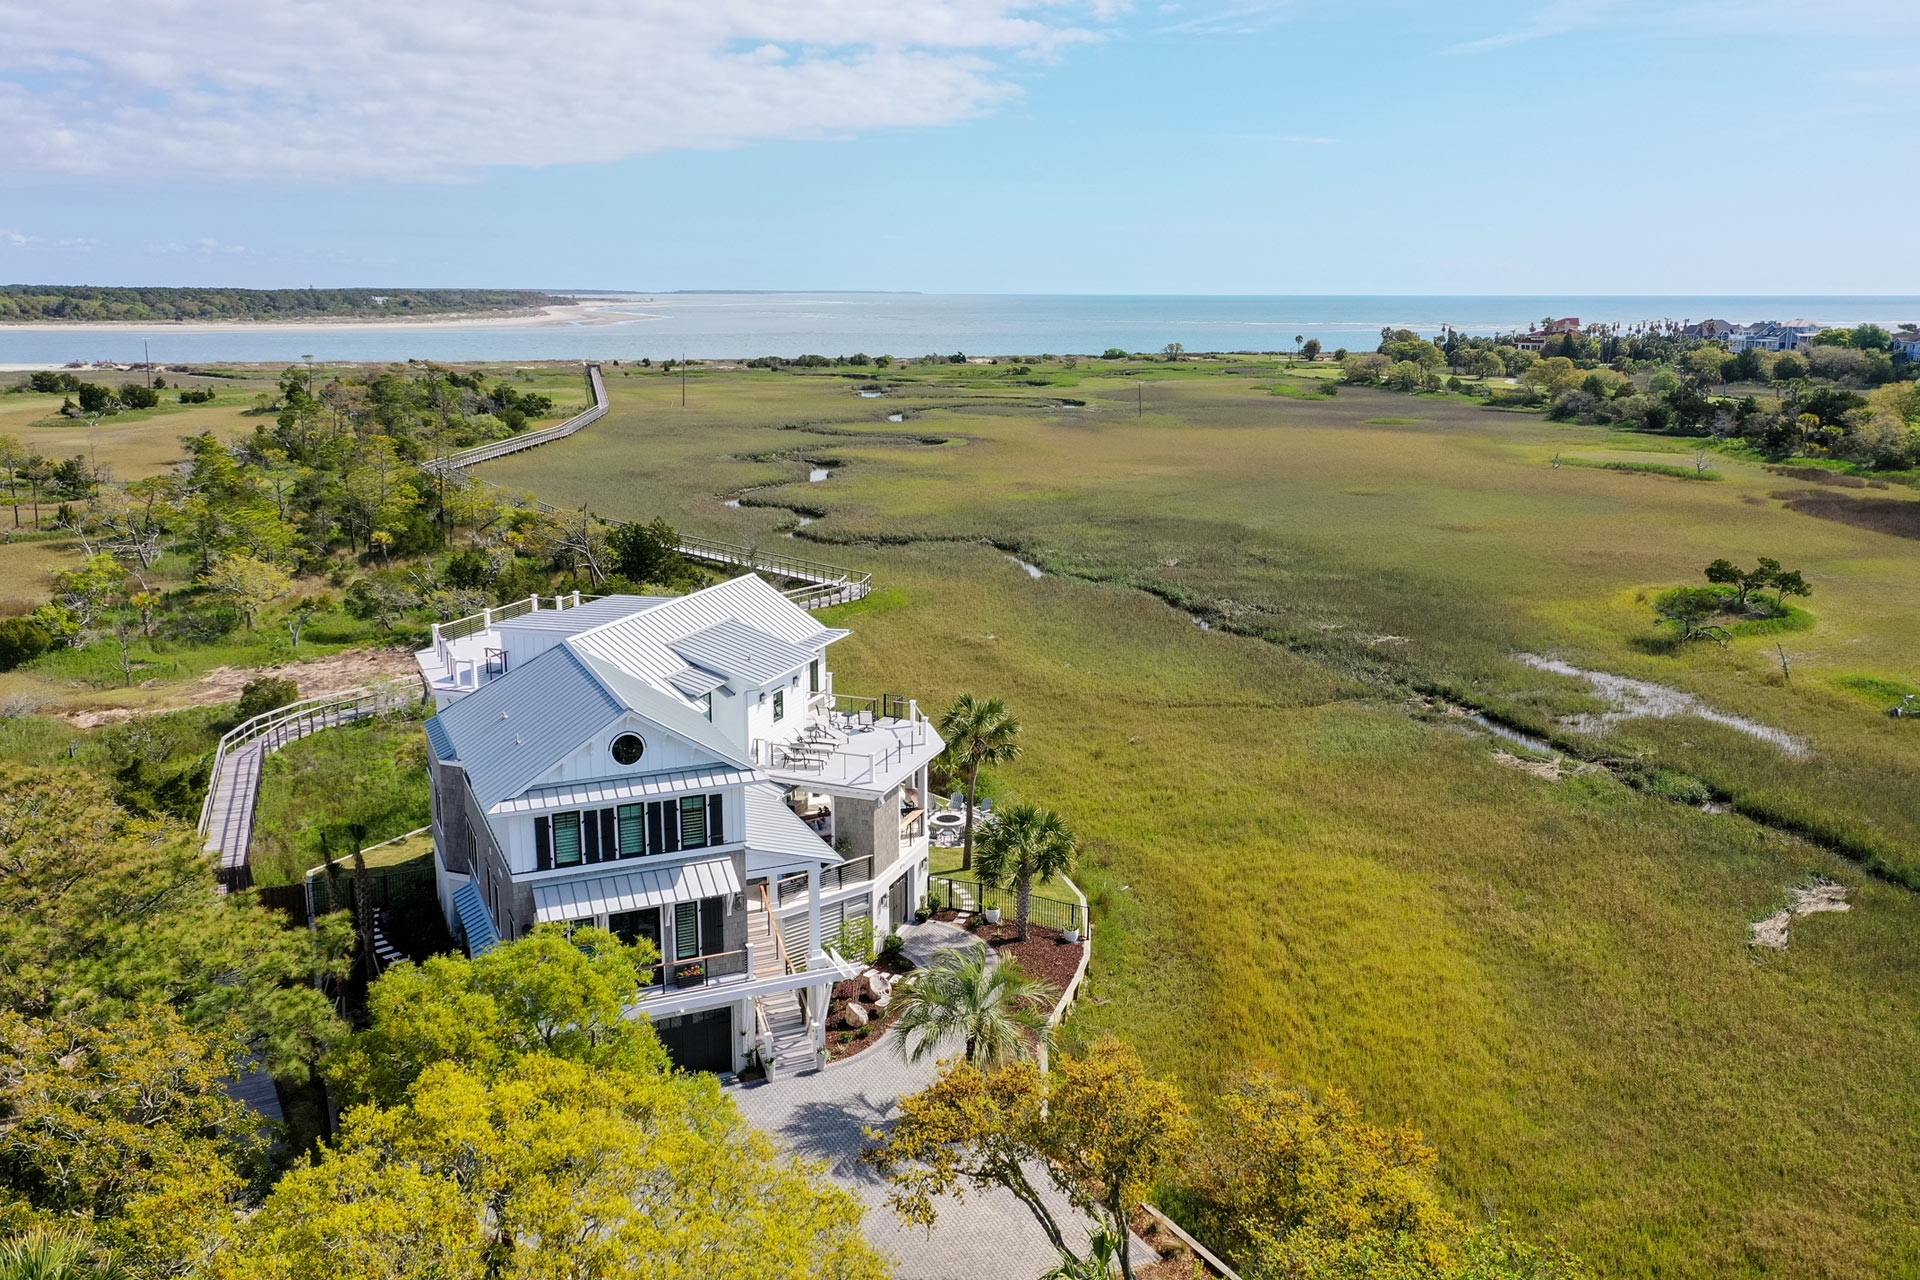 Custom designed home on the coast of South Carolina with unique ocean and marsh views